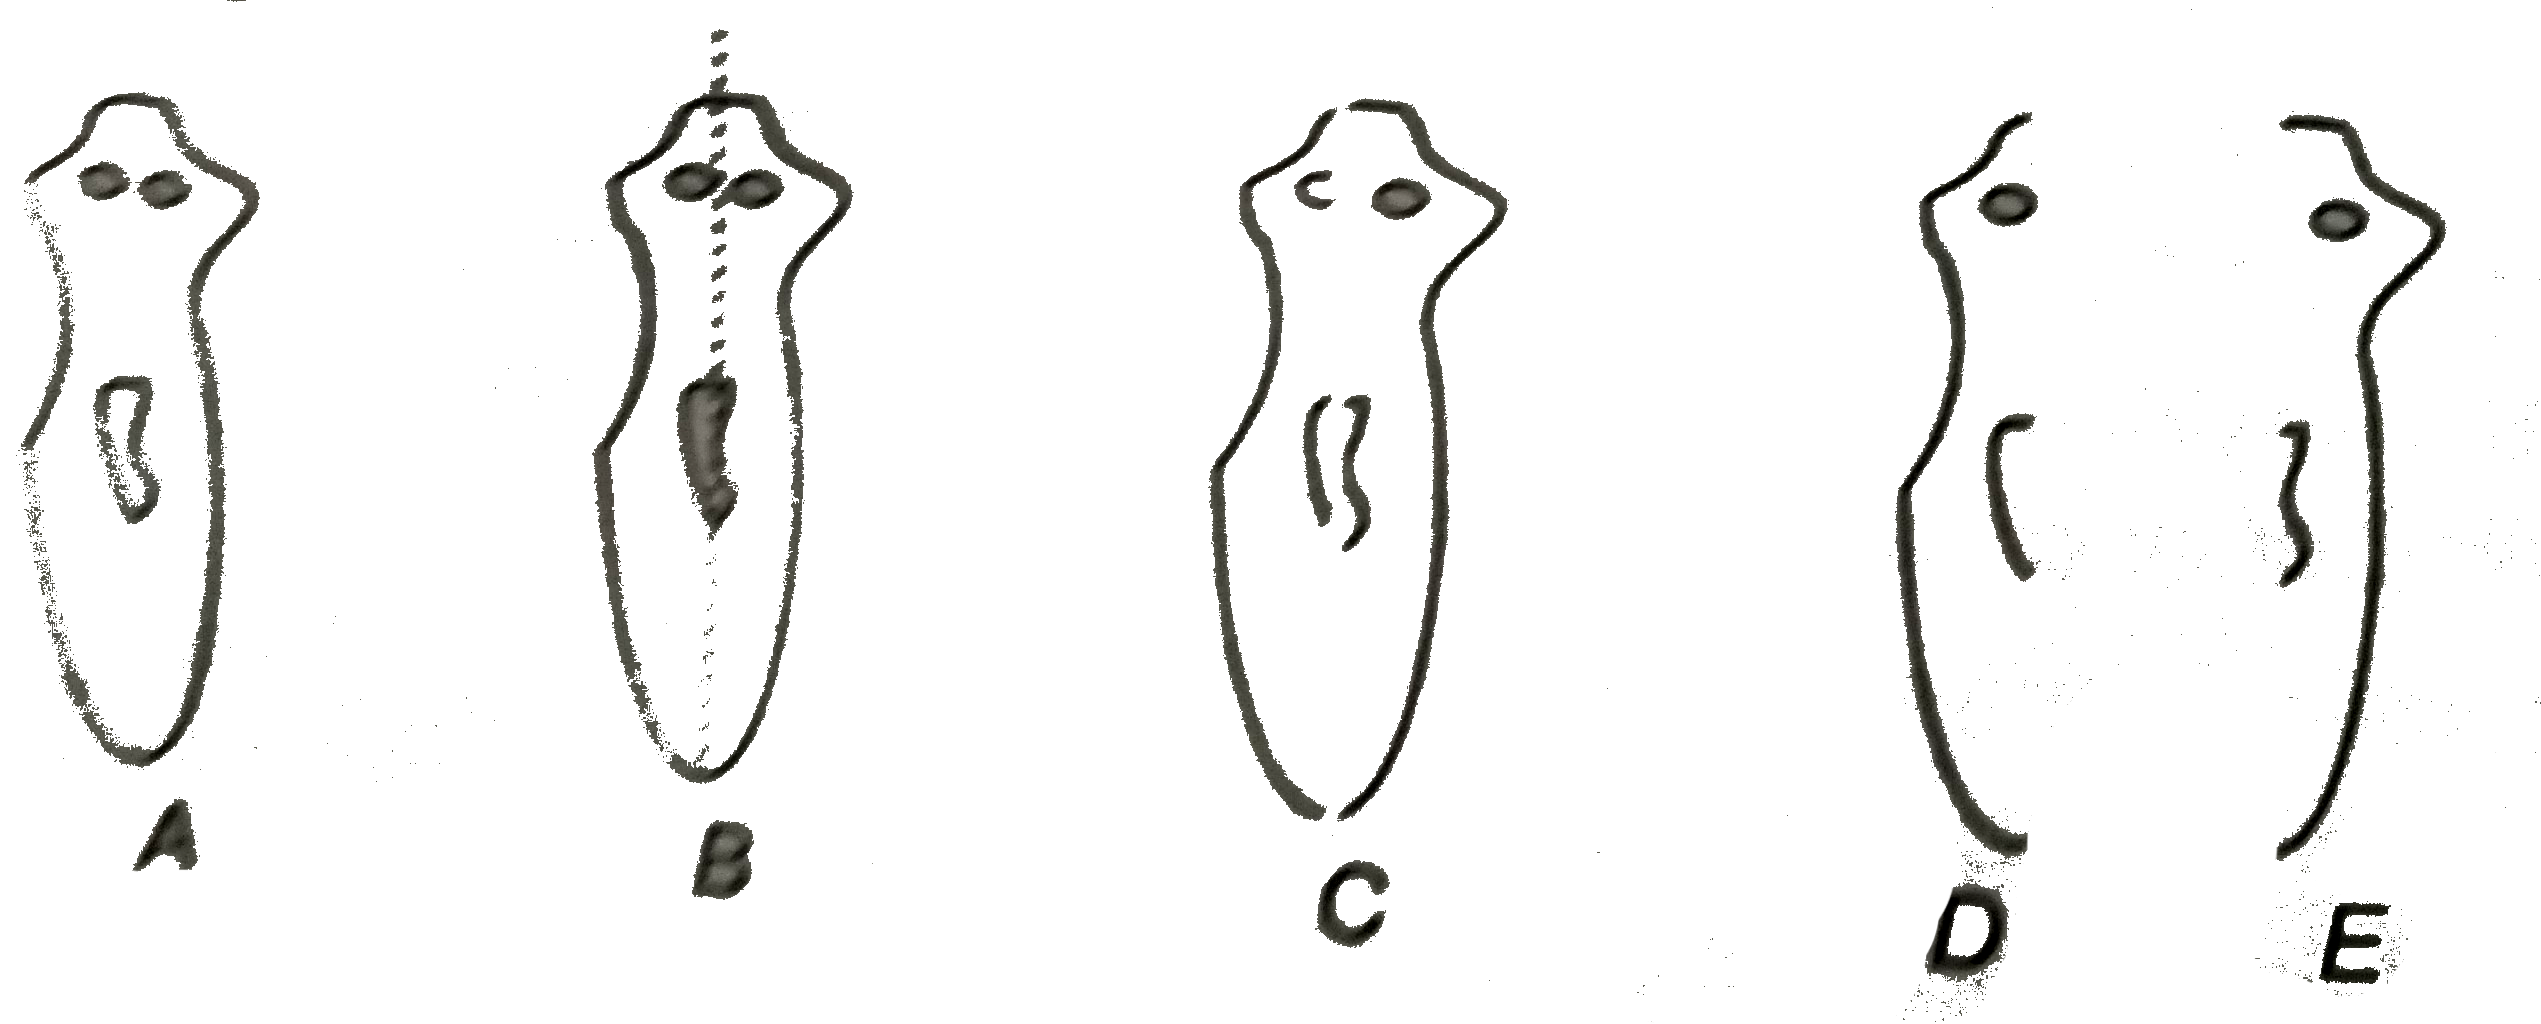 Would a Planaria cut vertically into two halves regenerate into two individuals? Complete the given figure D and E by indicating the regenerated regions.